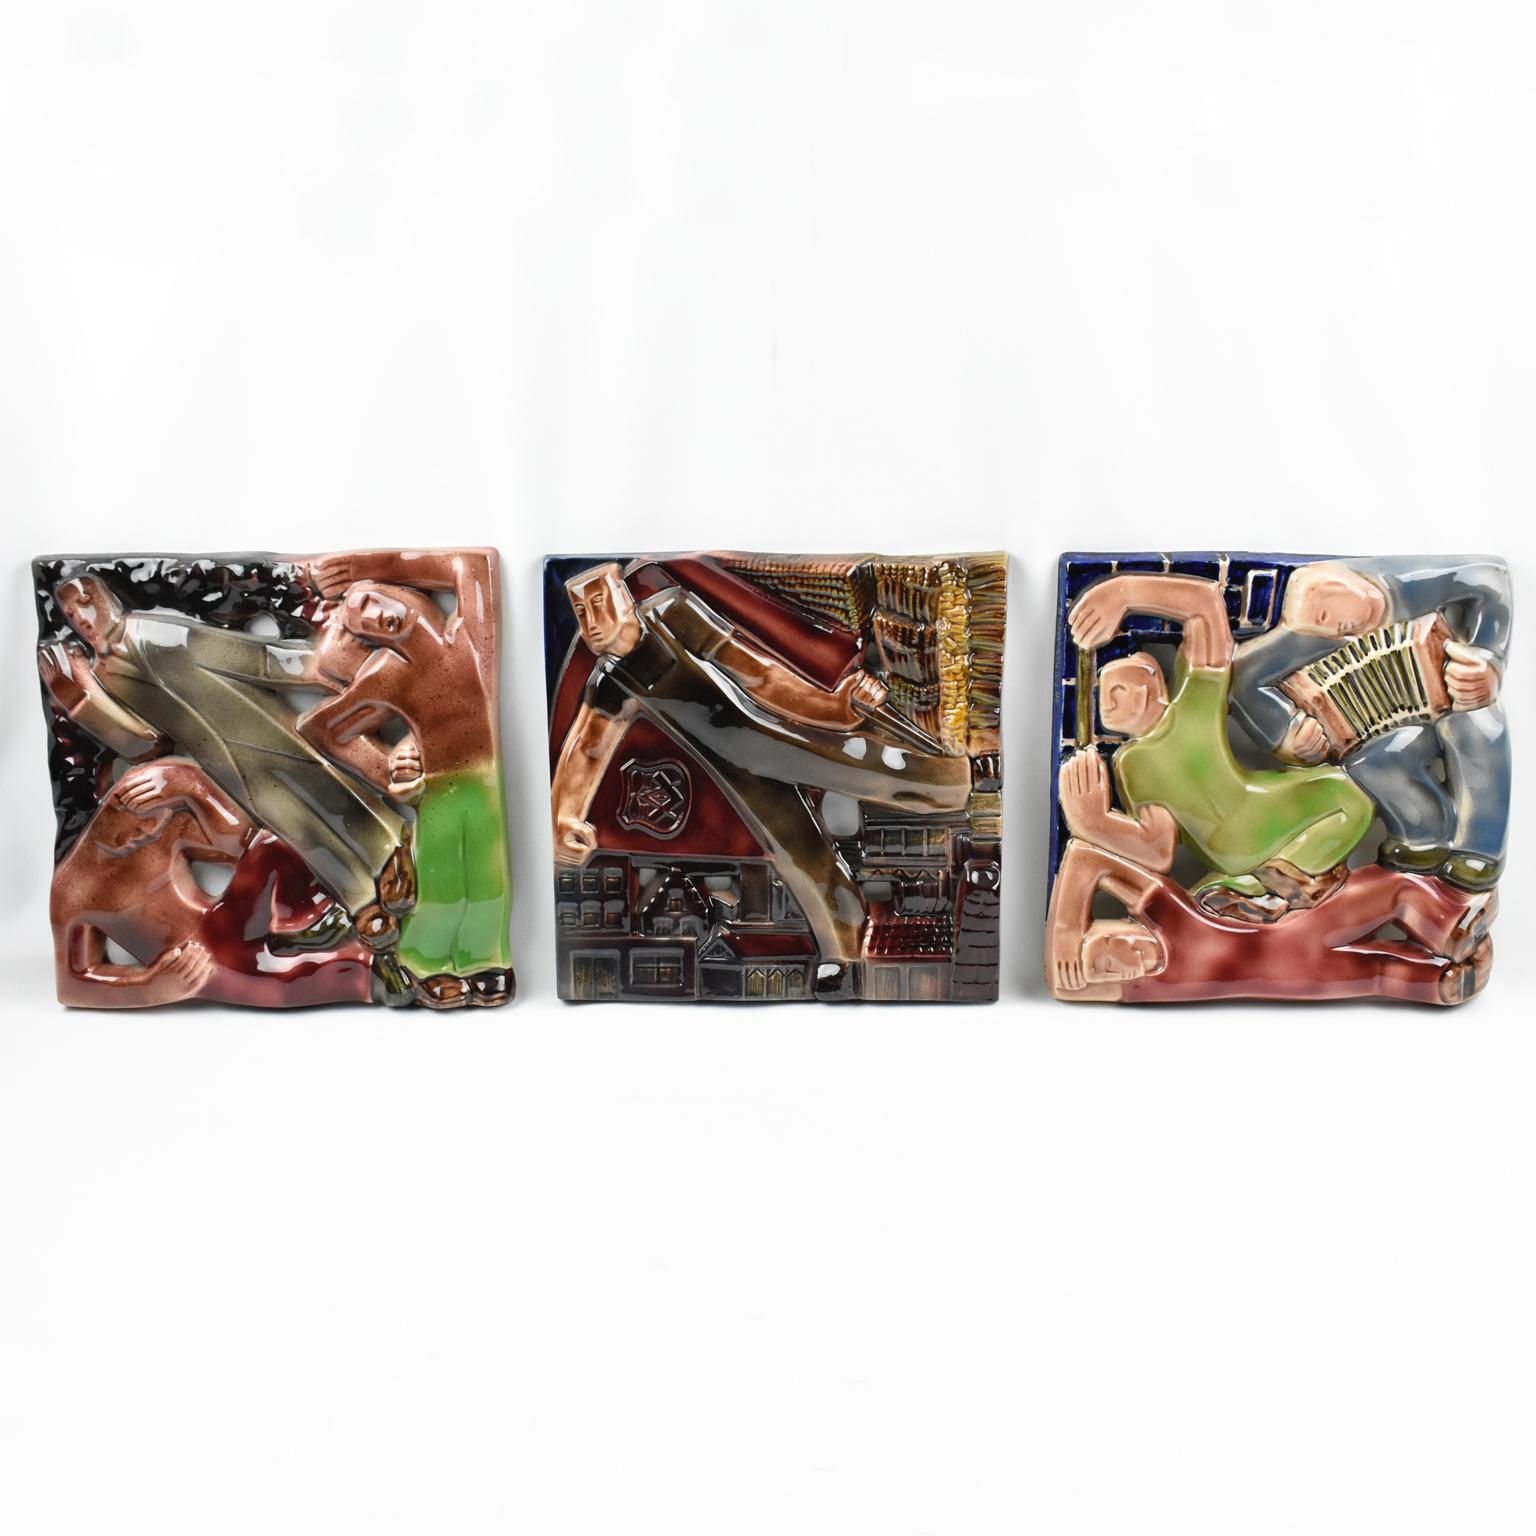 These stunning Rene Boschmans for Coceram cubist style figural ceramic plaques or wall tiles depict industrial, working, and sports scenes. The trio of artwork boasts a cubist design on shiny glazed ceramic with industrial and masonic symbolism.